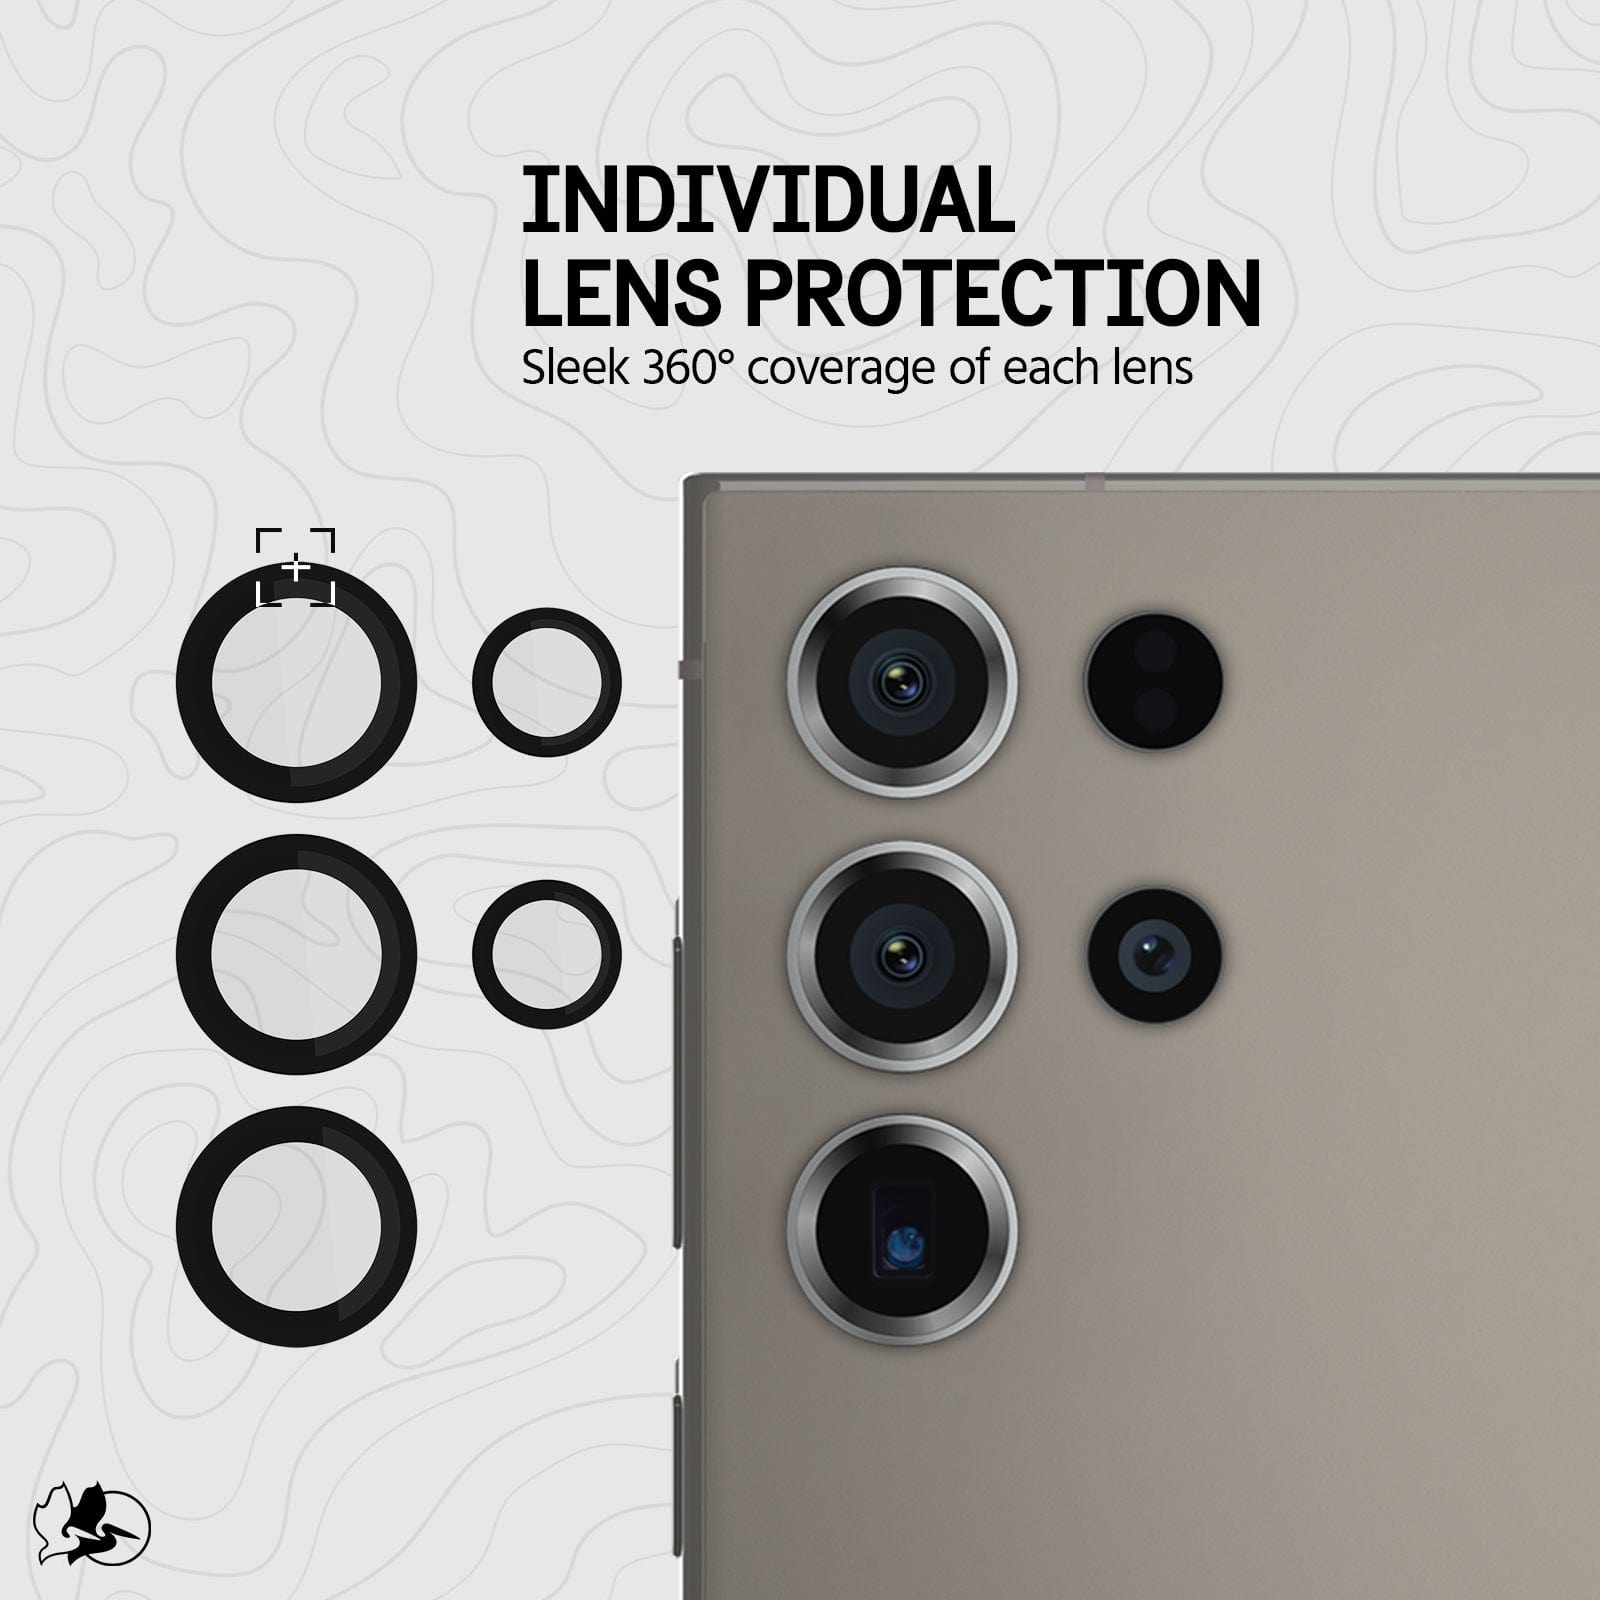 INDIVIDUAL LENS PROTECTION SLEEK 360 DEGREE COVERAGE OF EACH LENS